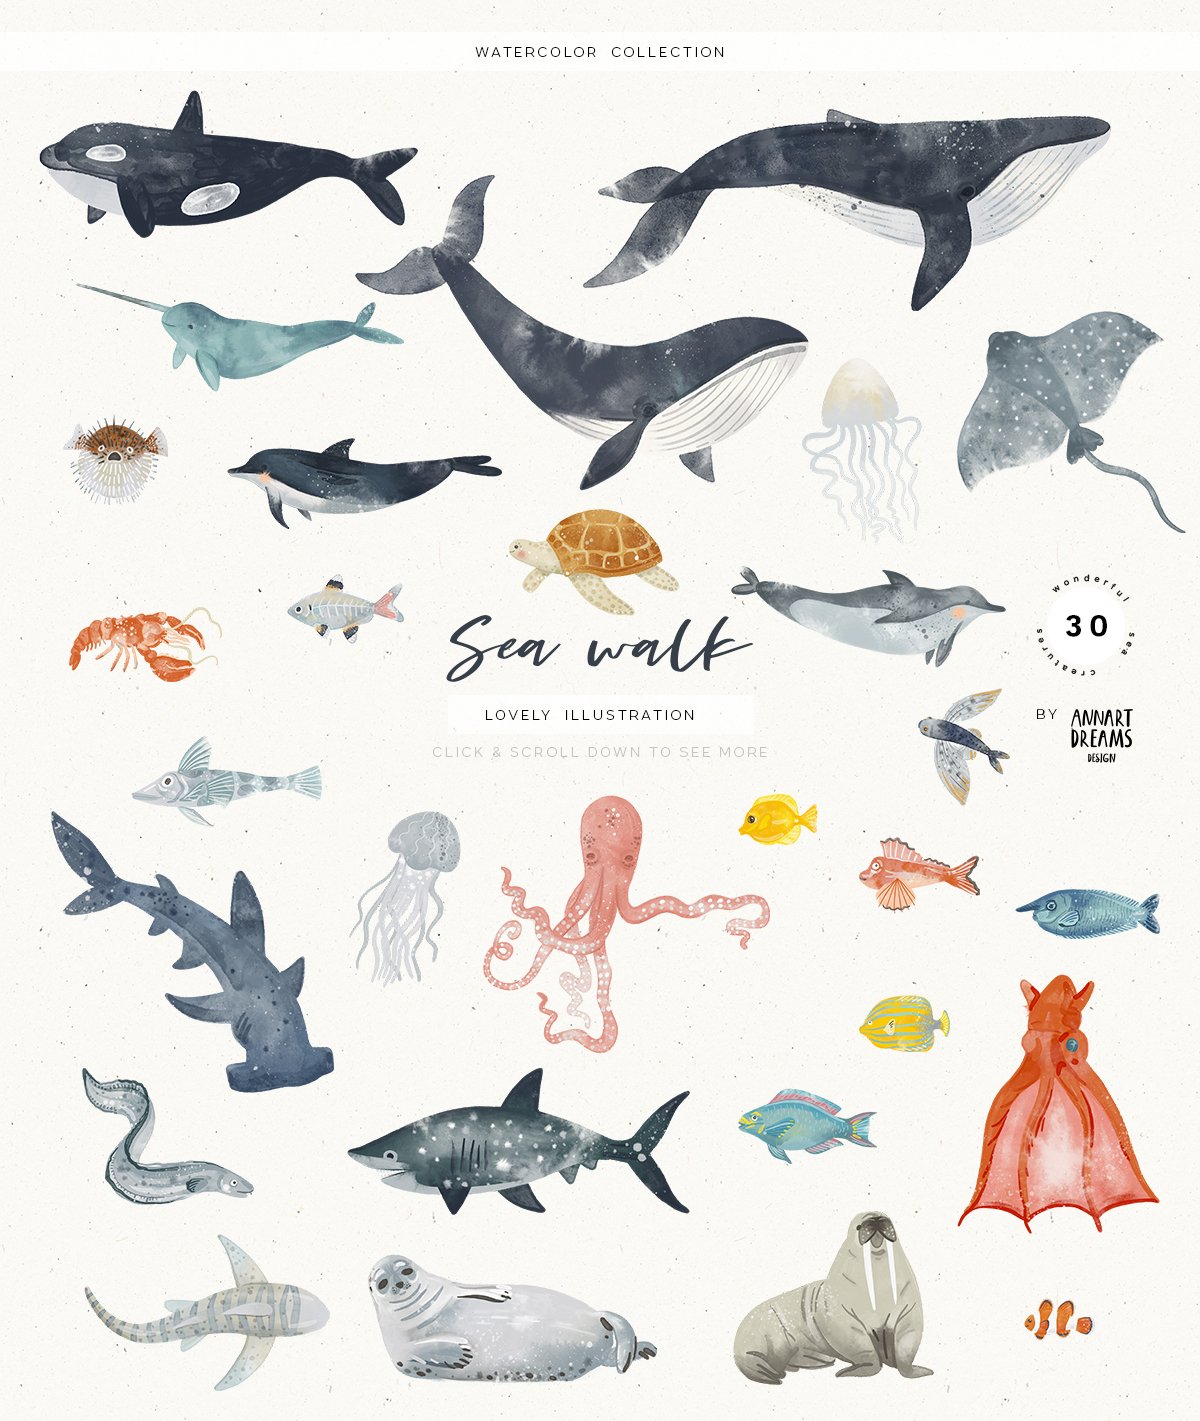 The cute illustrations and patterns with funny sea features.